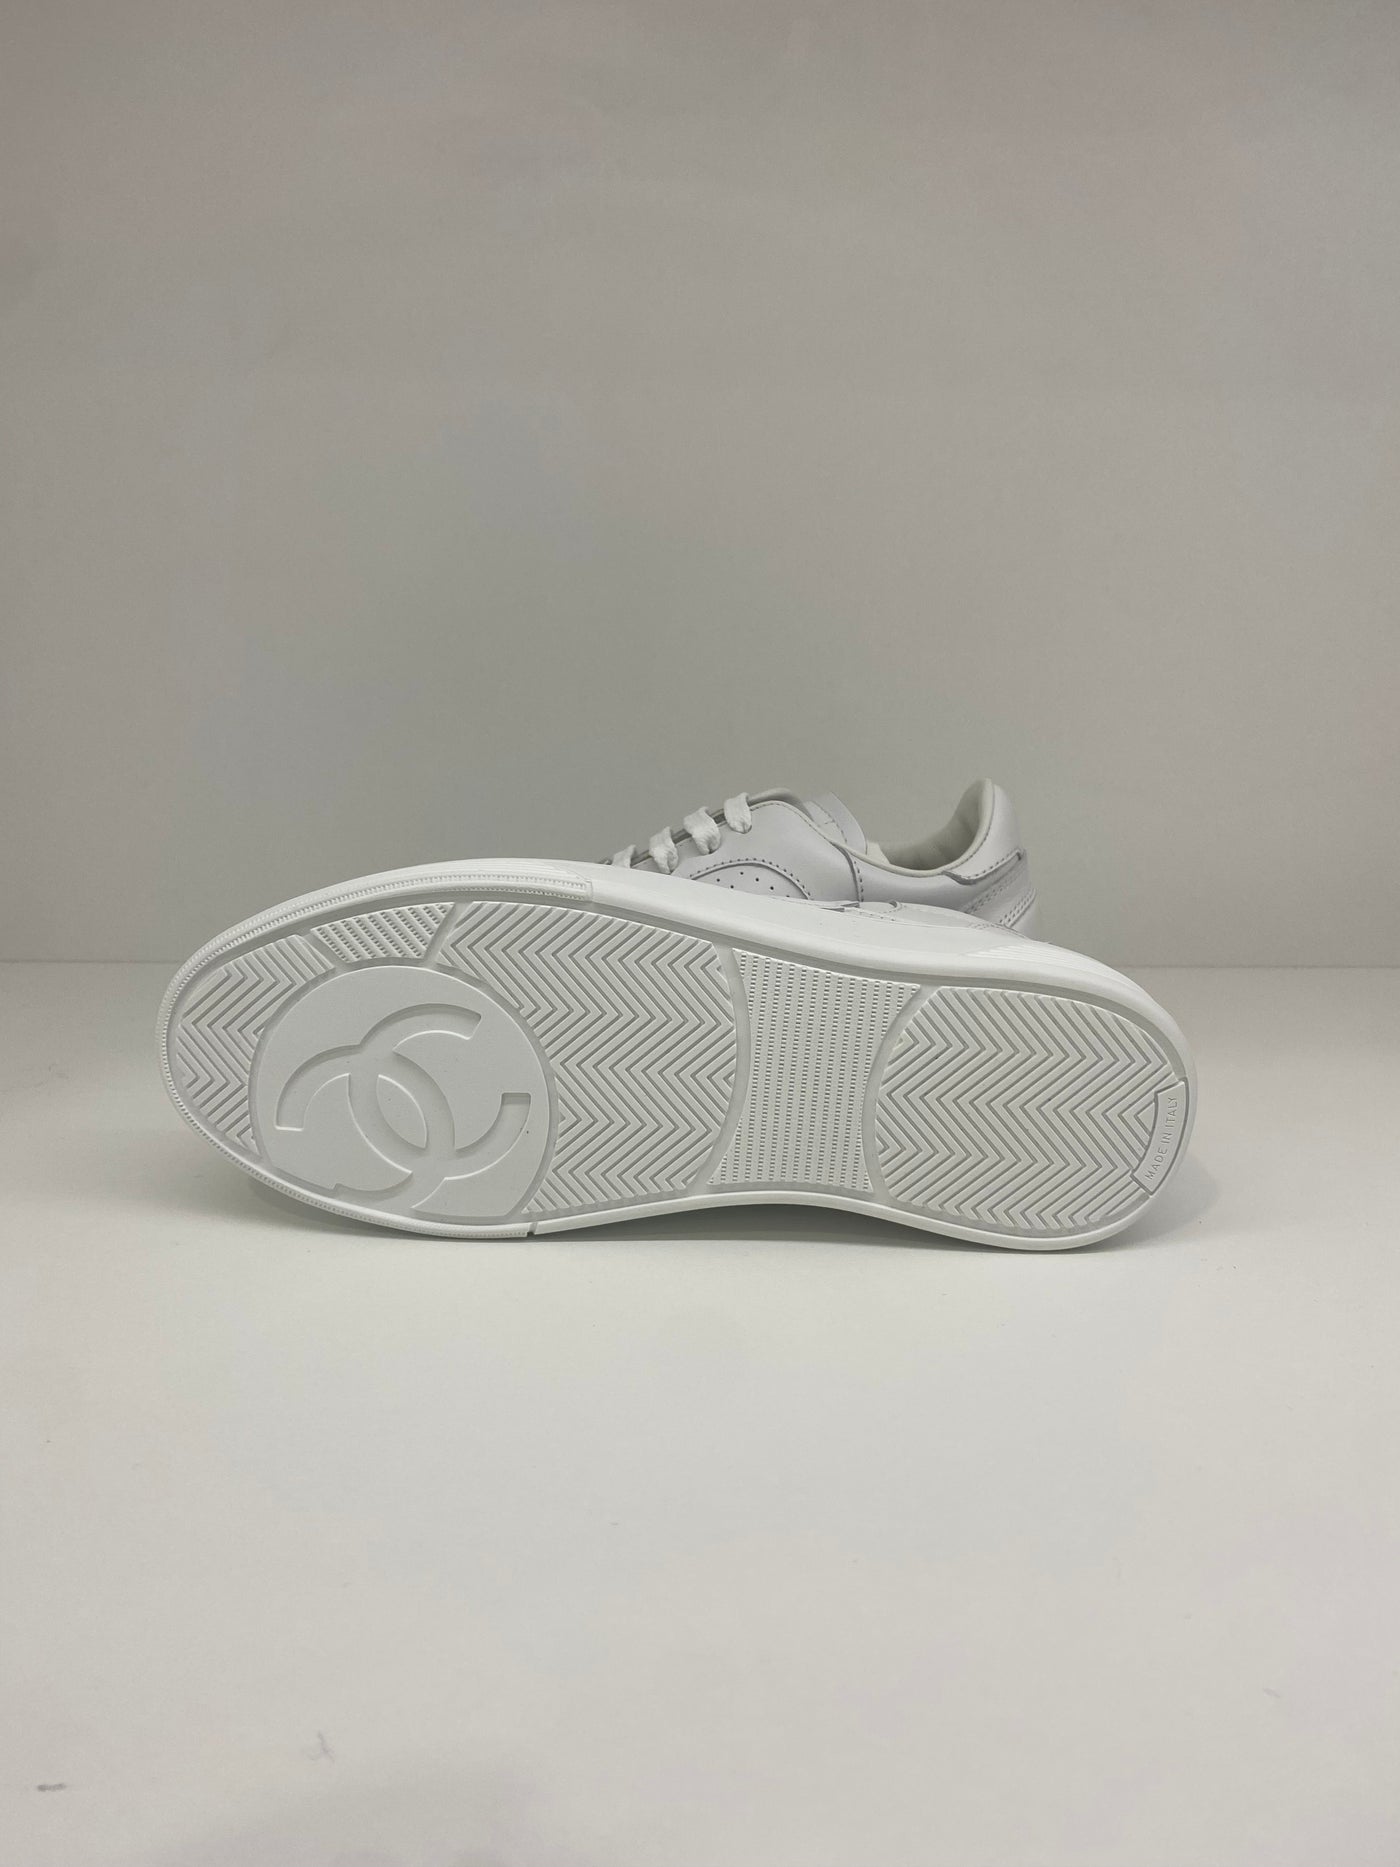 Chanel White Sneakers 36.5